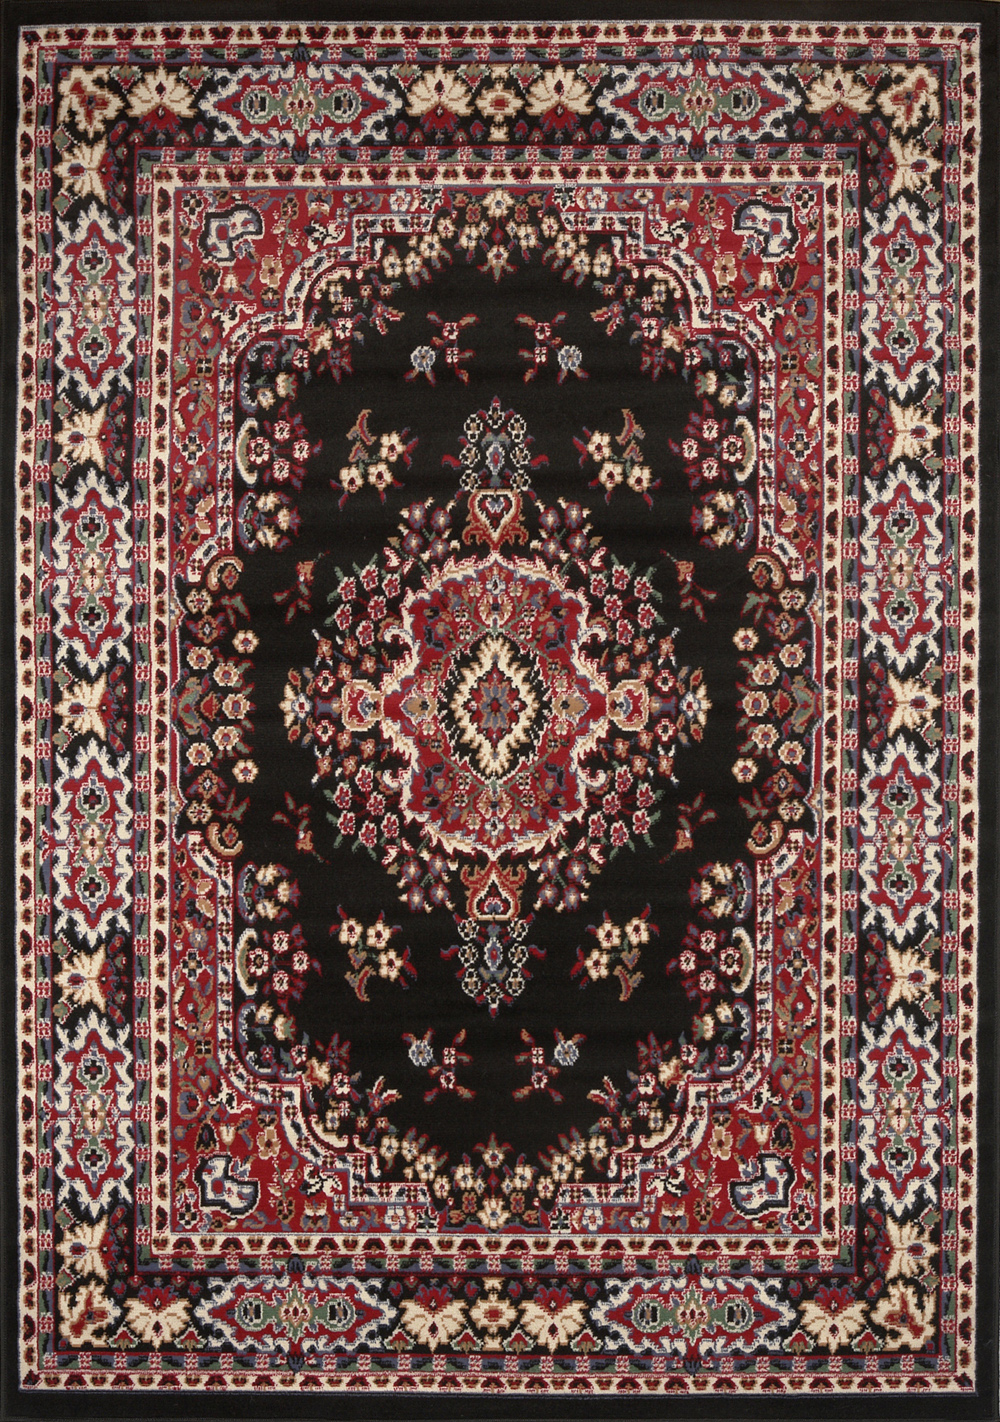 Traditional persian style rugs to adorn your home with.